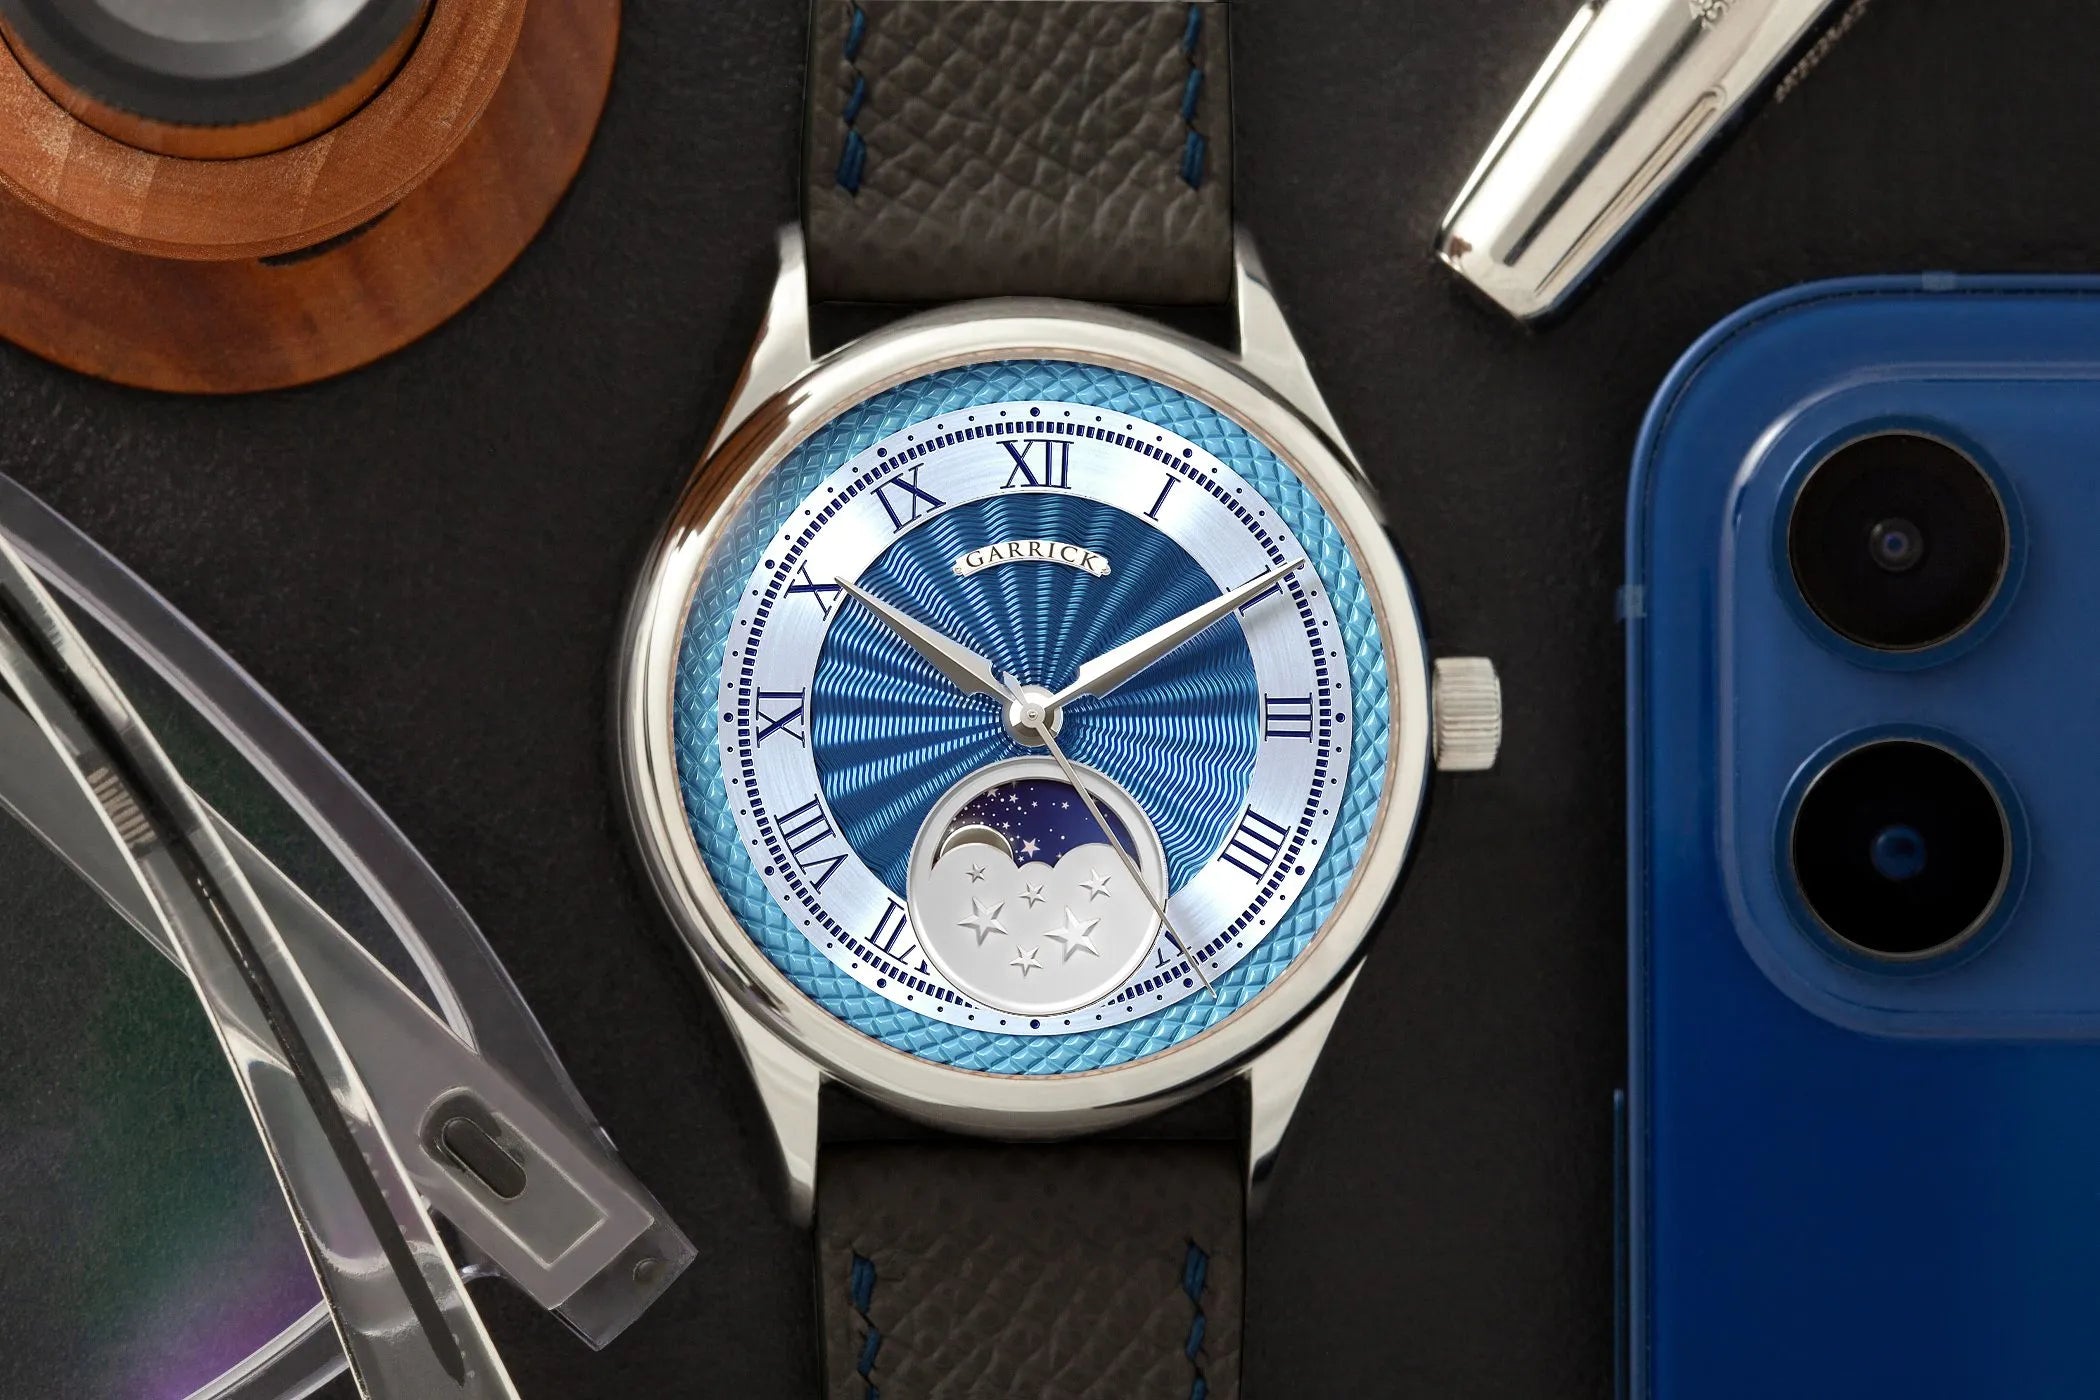 Britsih made S5 watch with moon phase by Garrick watchmakers